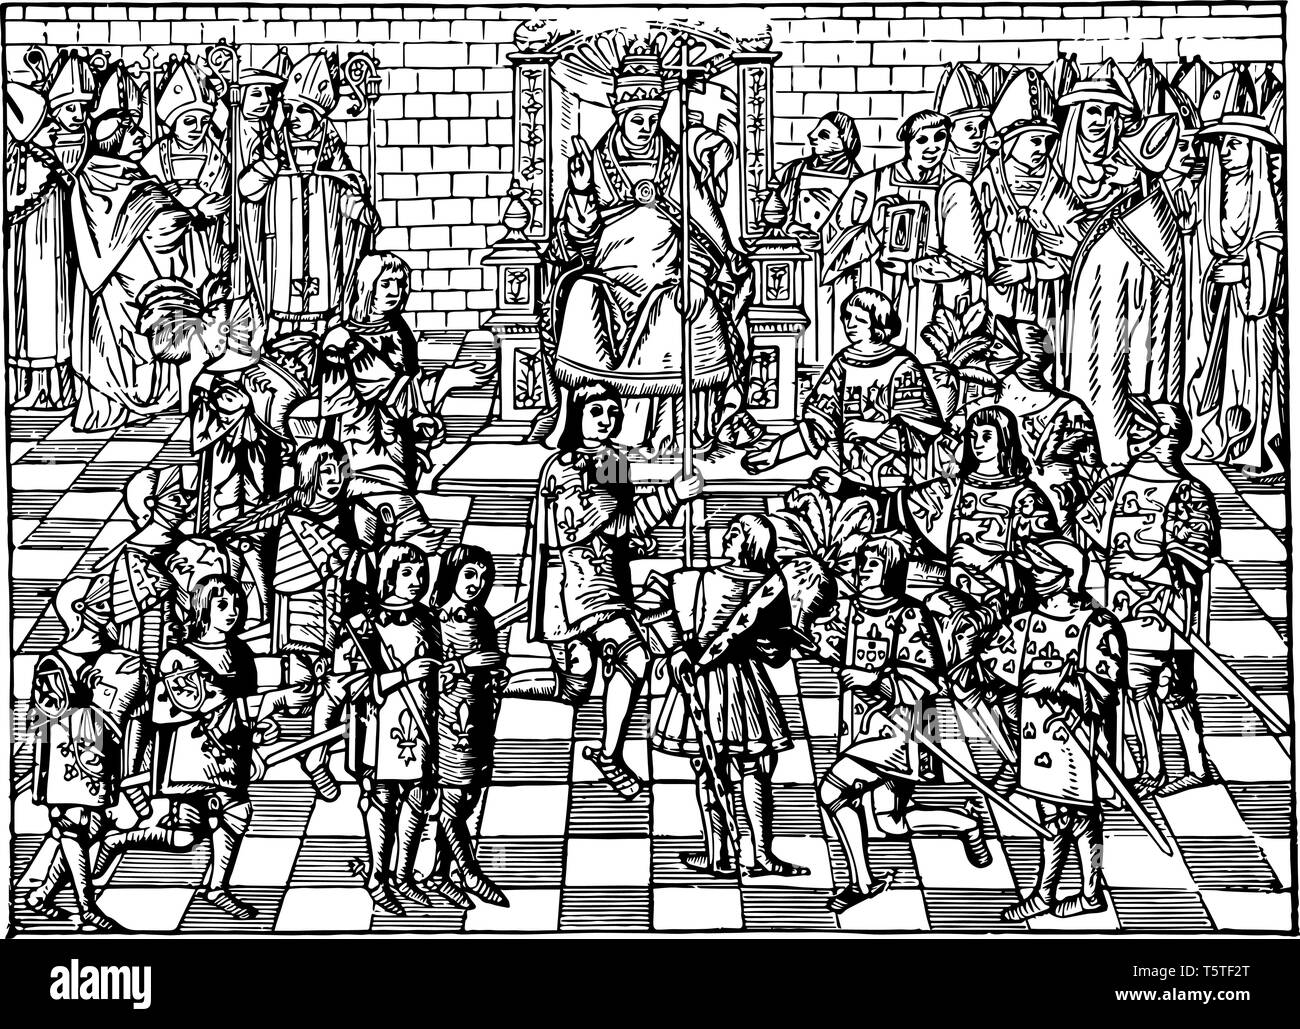 In this image showing urban Pope II on the council of Clermont. Many people have gathered, Pope Urban II is guiding them and changing history, vintage Stock Vector